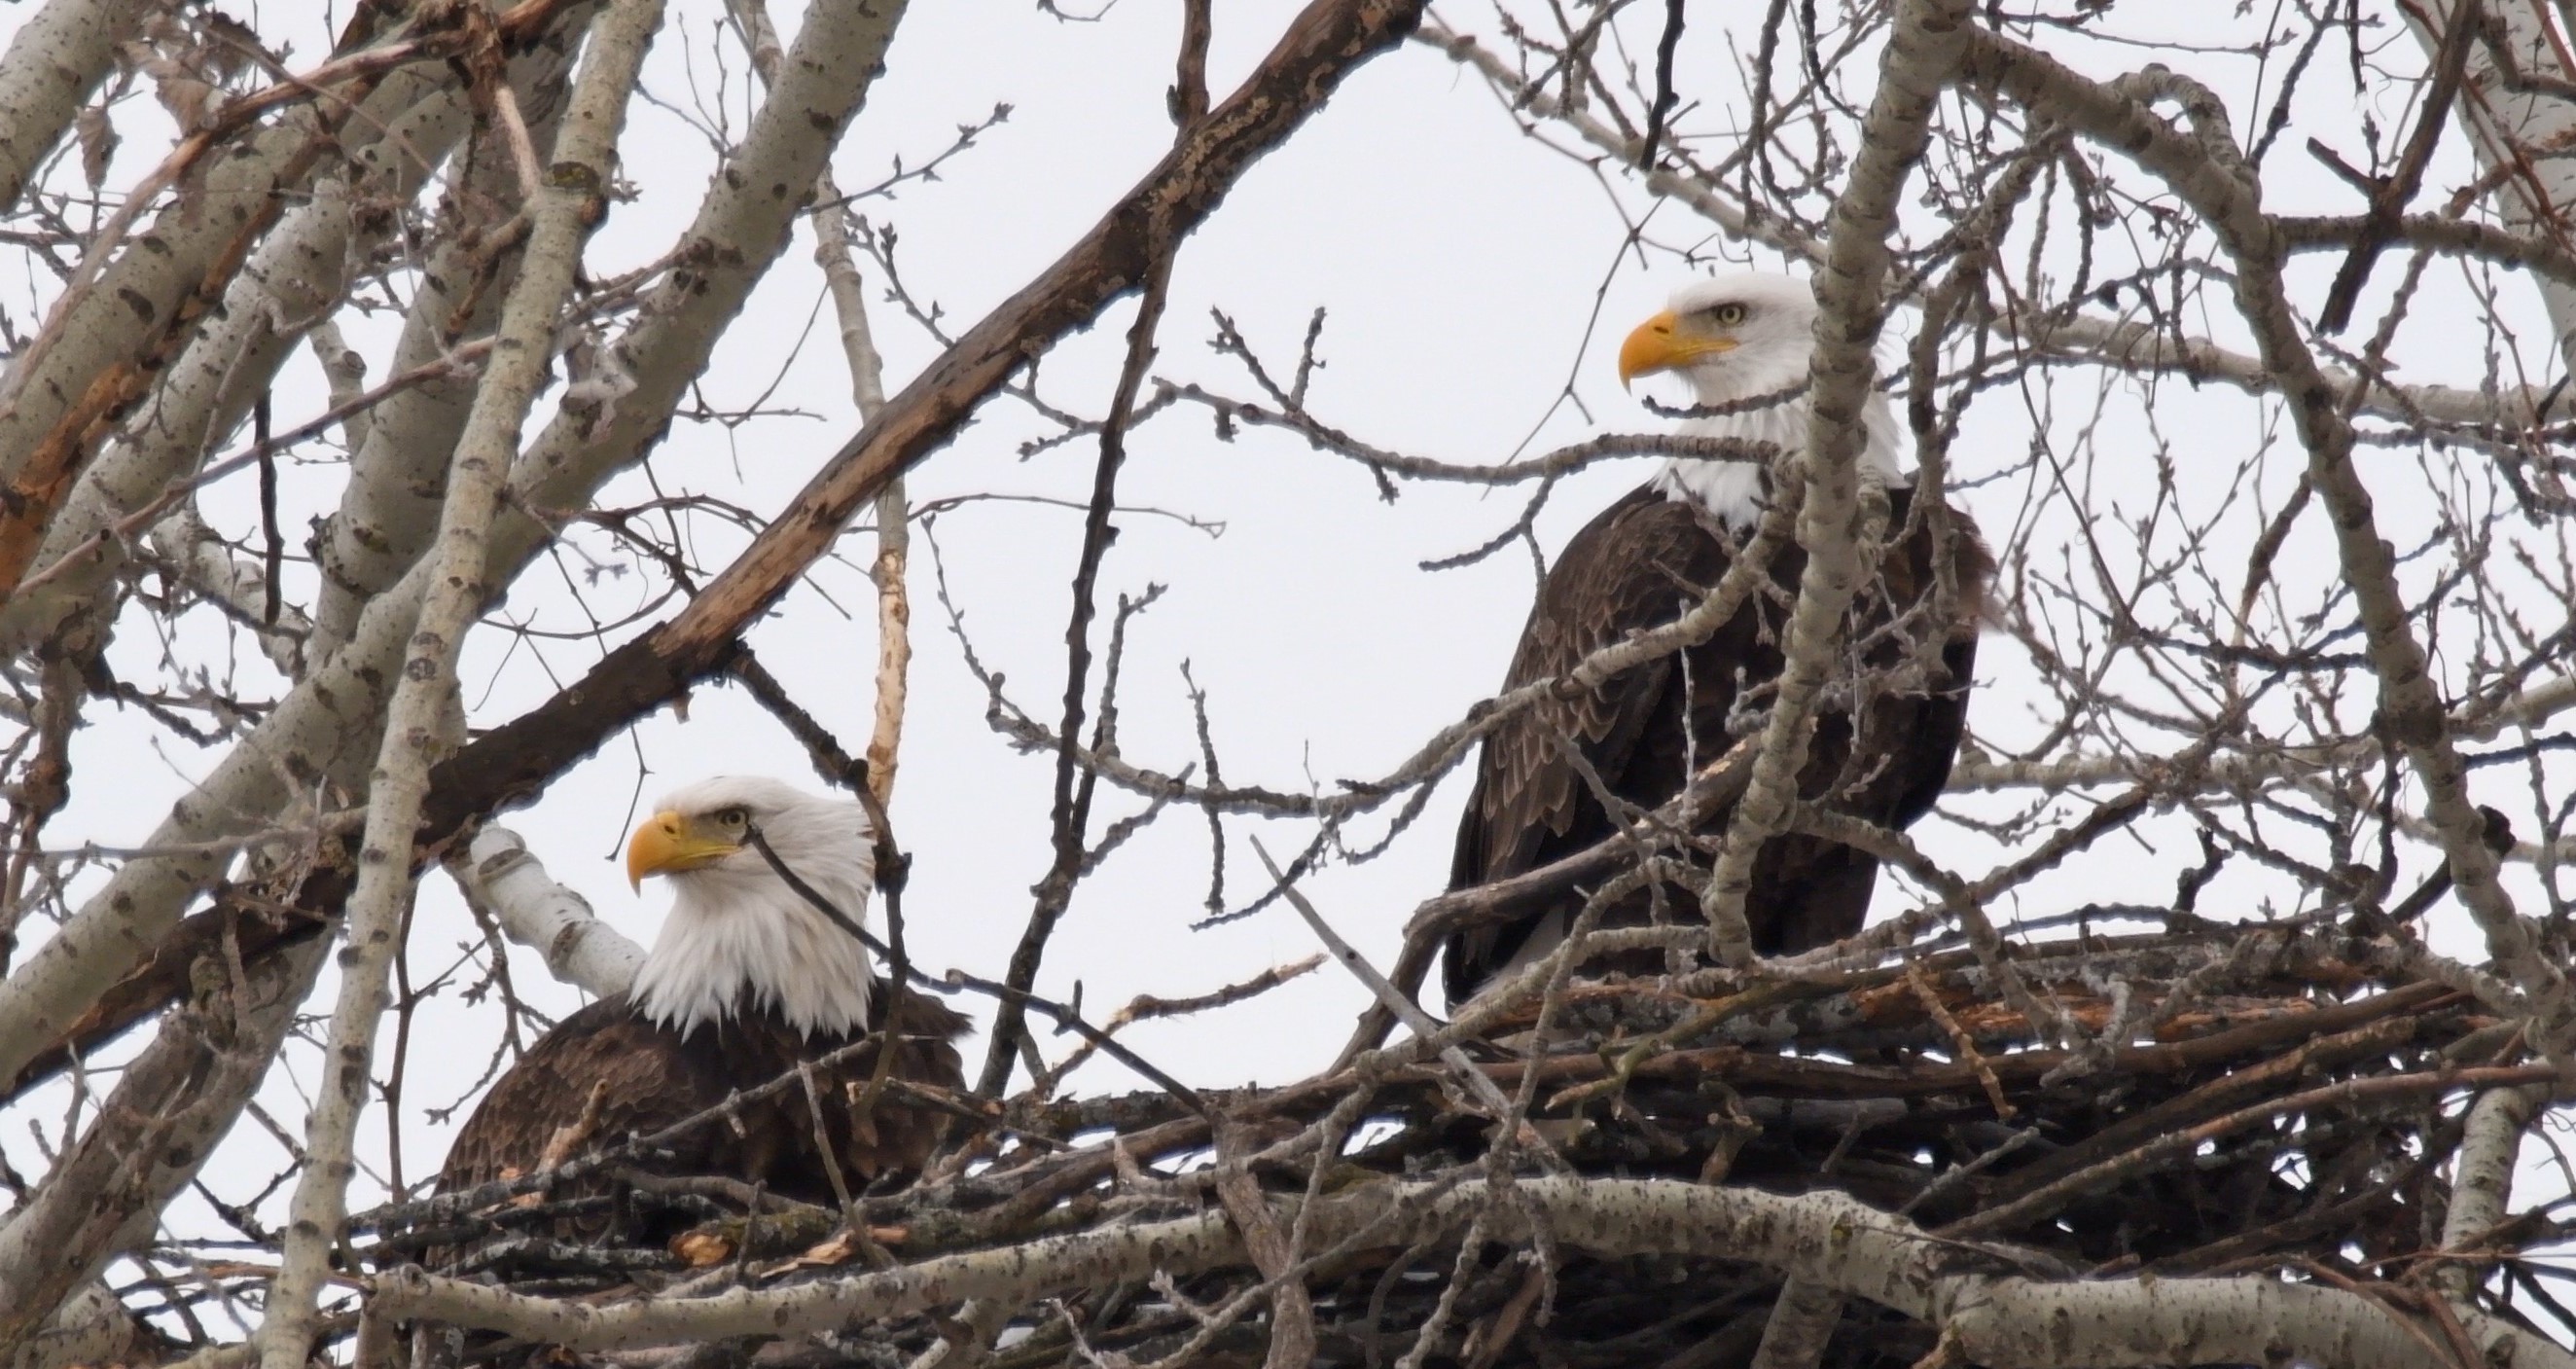 Two bald eagles sitting in a nest.